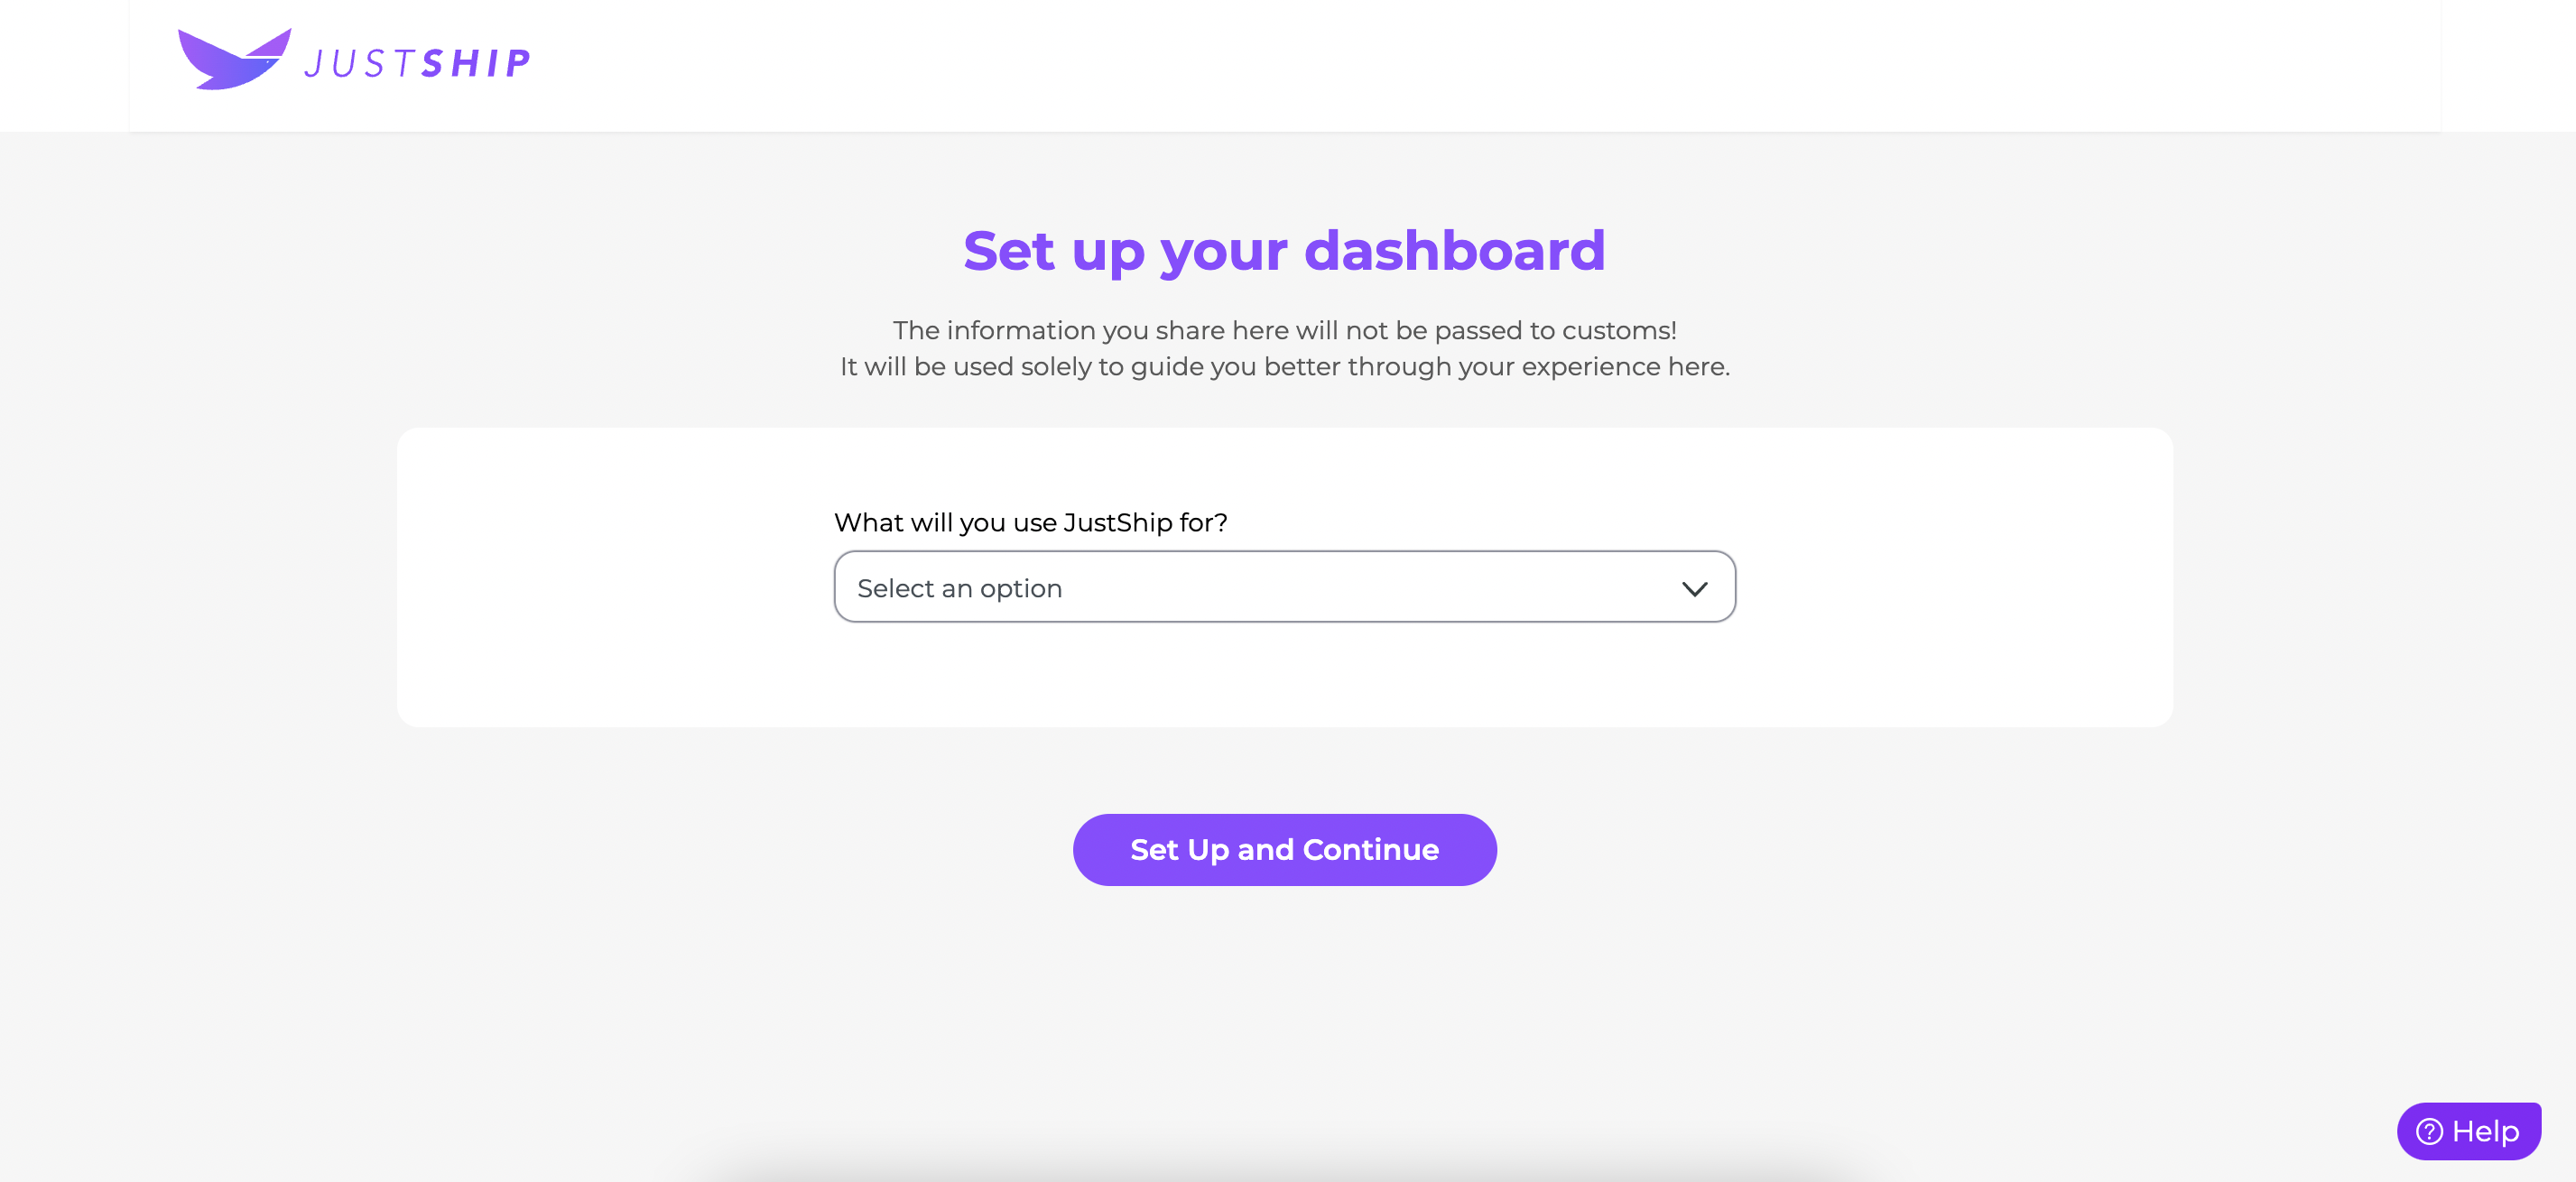 justship's onboarding questions